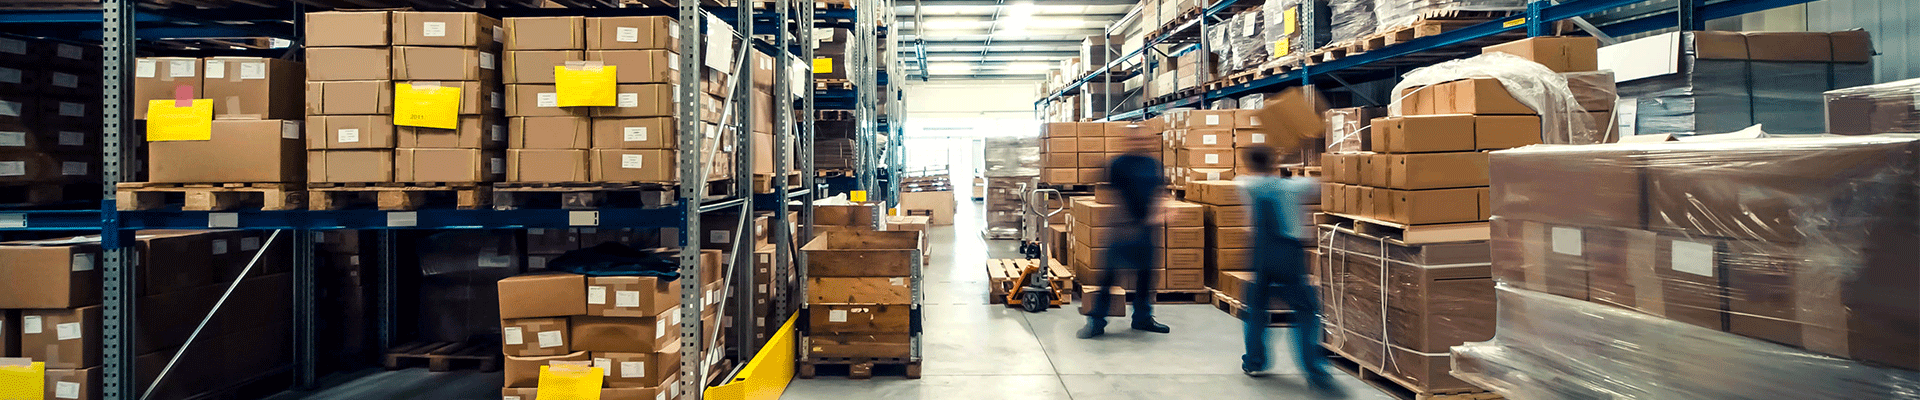 Merchant fulfilling orders in their warehouse, one of the various alternatives to Fulfillment by Amazon.